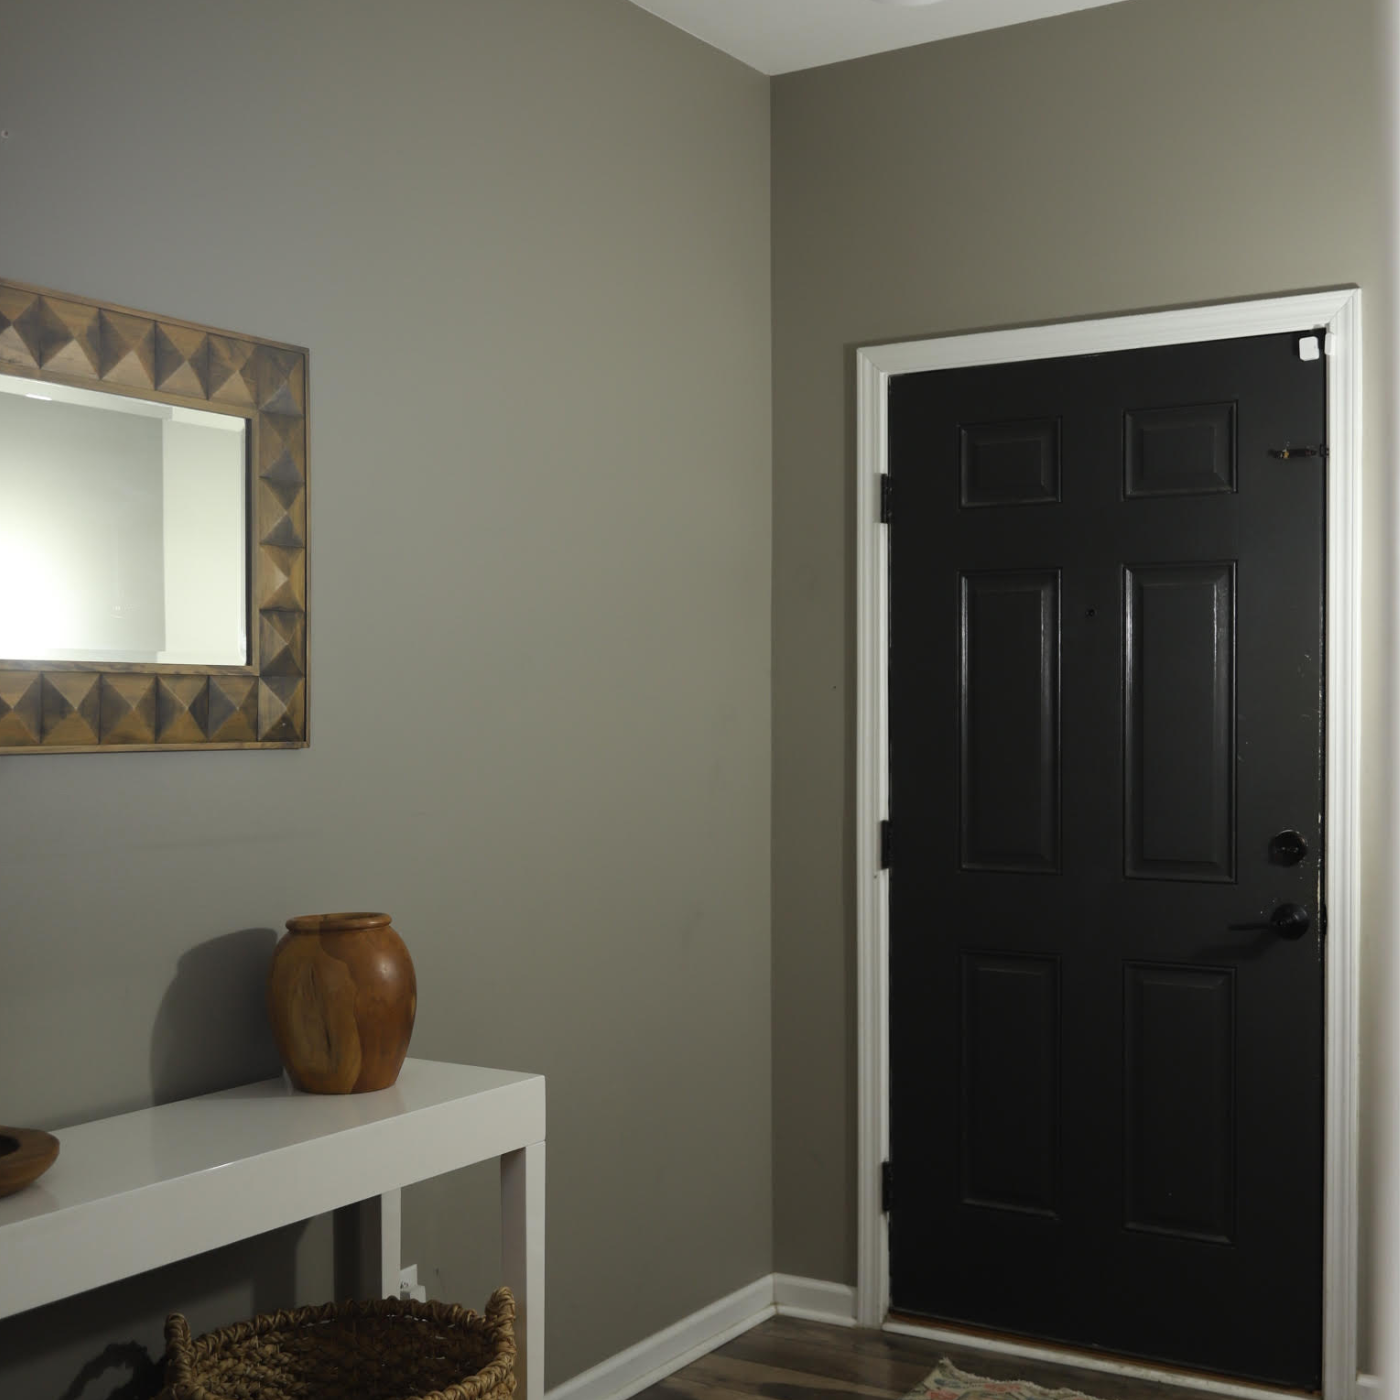 The entryway before the new grasscloth wallpaper glowup featuring gray walls, white trim and a black door. A rectangular mirror is placed lengthwise above a small white table with a wooden vase on it and grass baskets below.